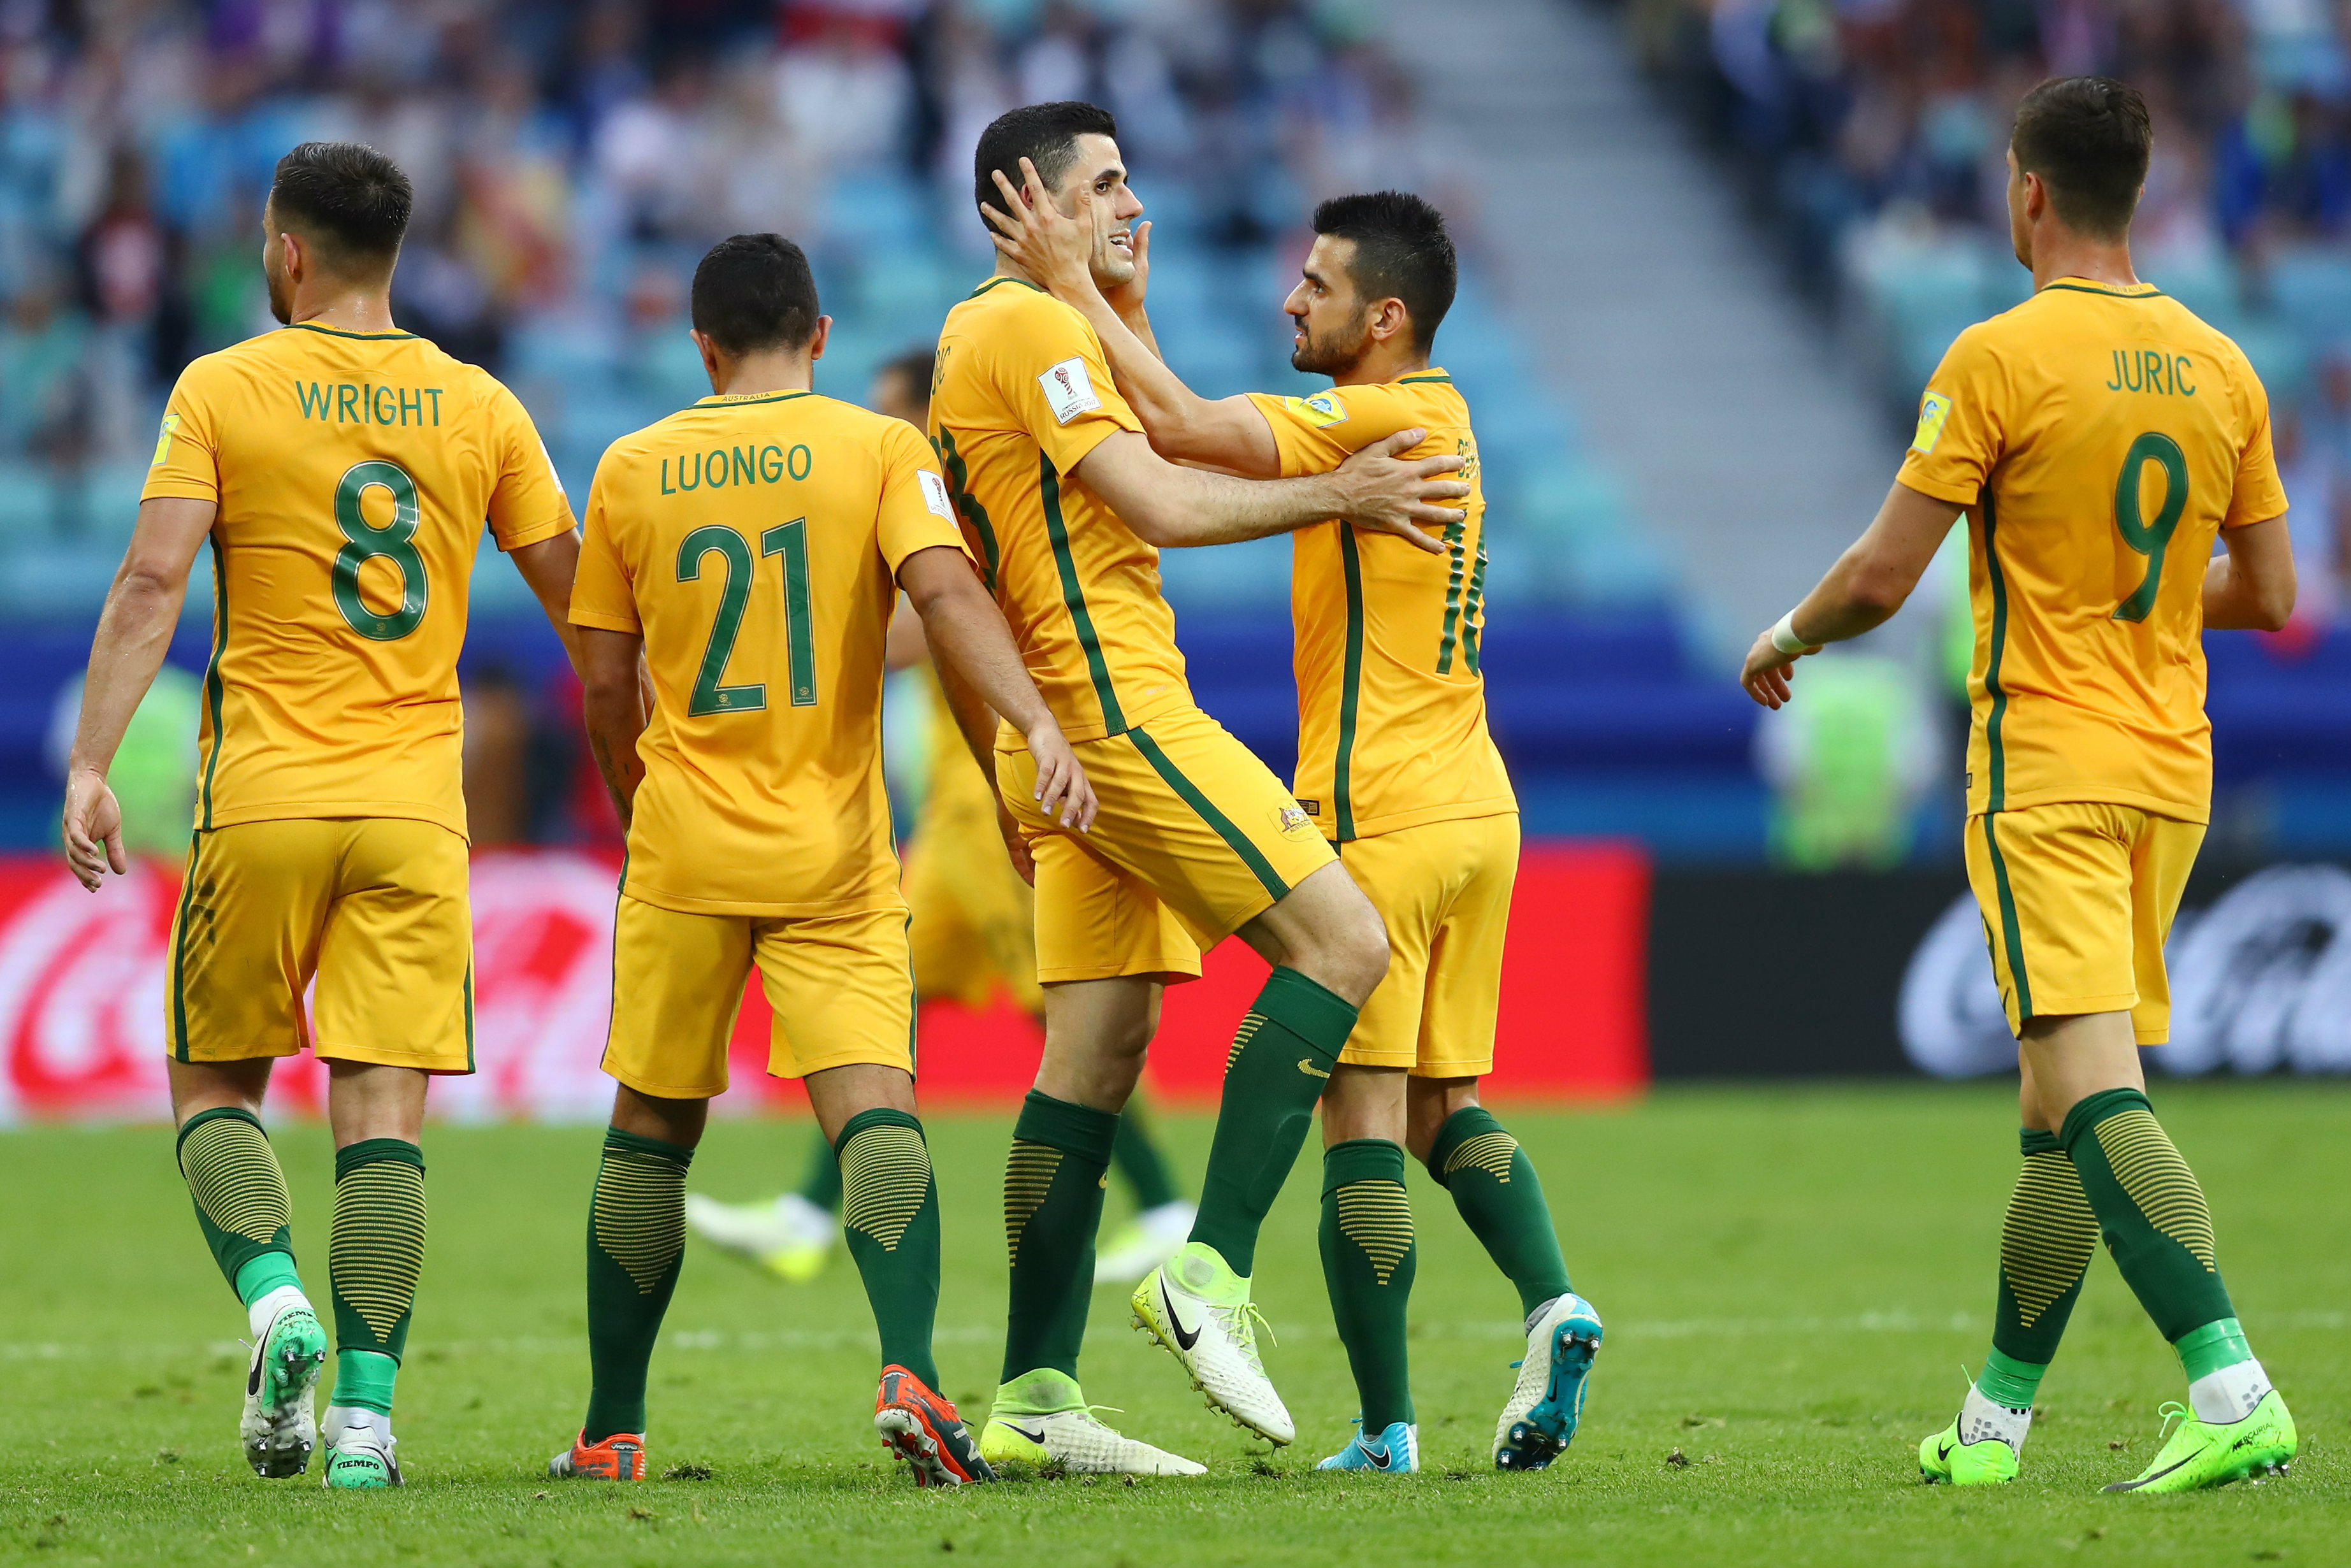 The Caltex Socceroos celebrate scoring a goal during the FIFA Confederations Cup.